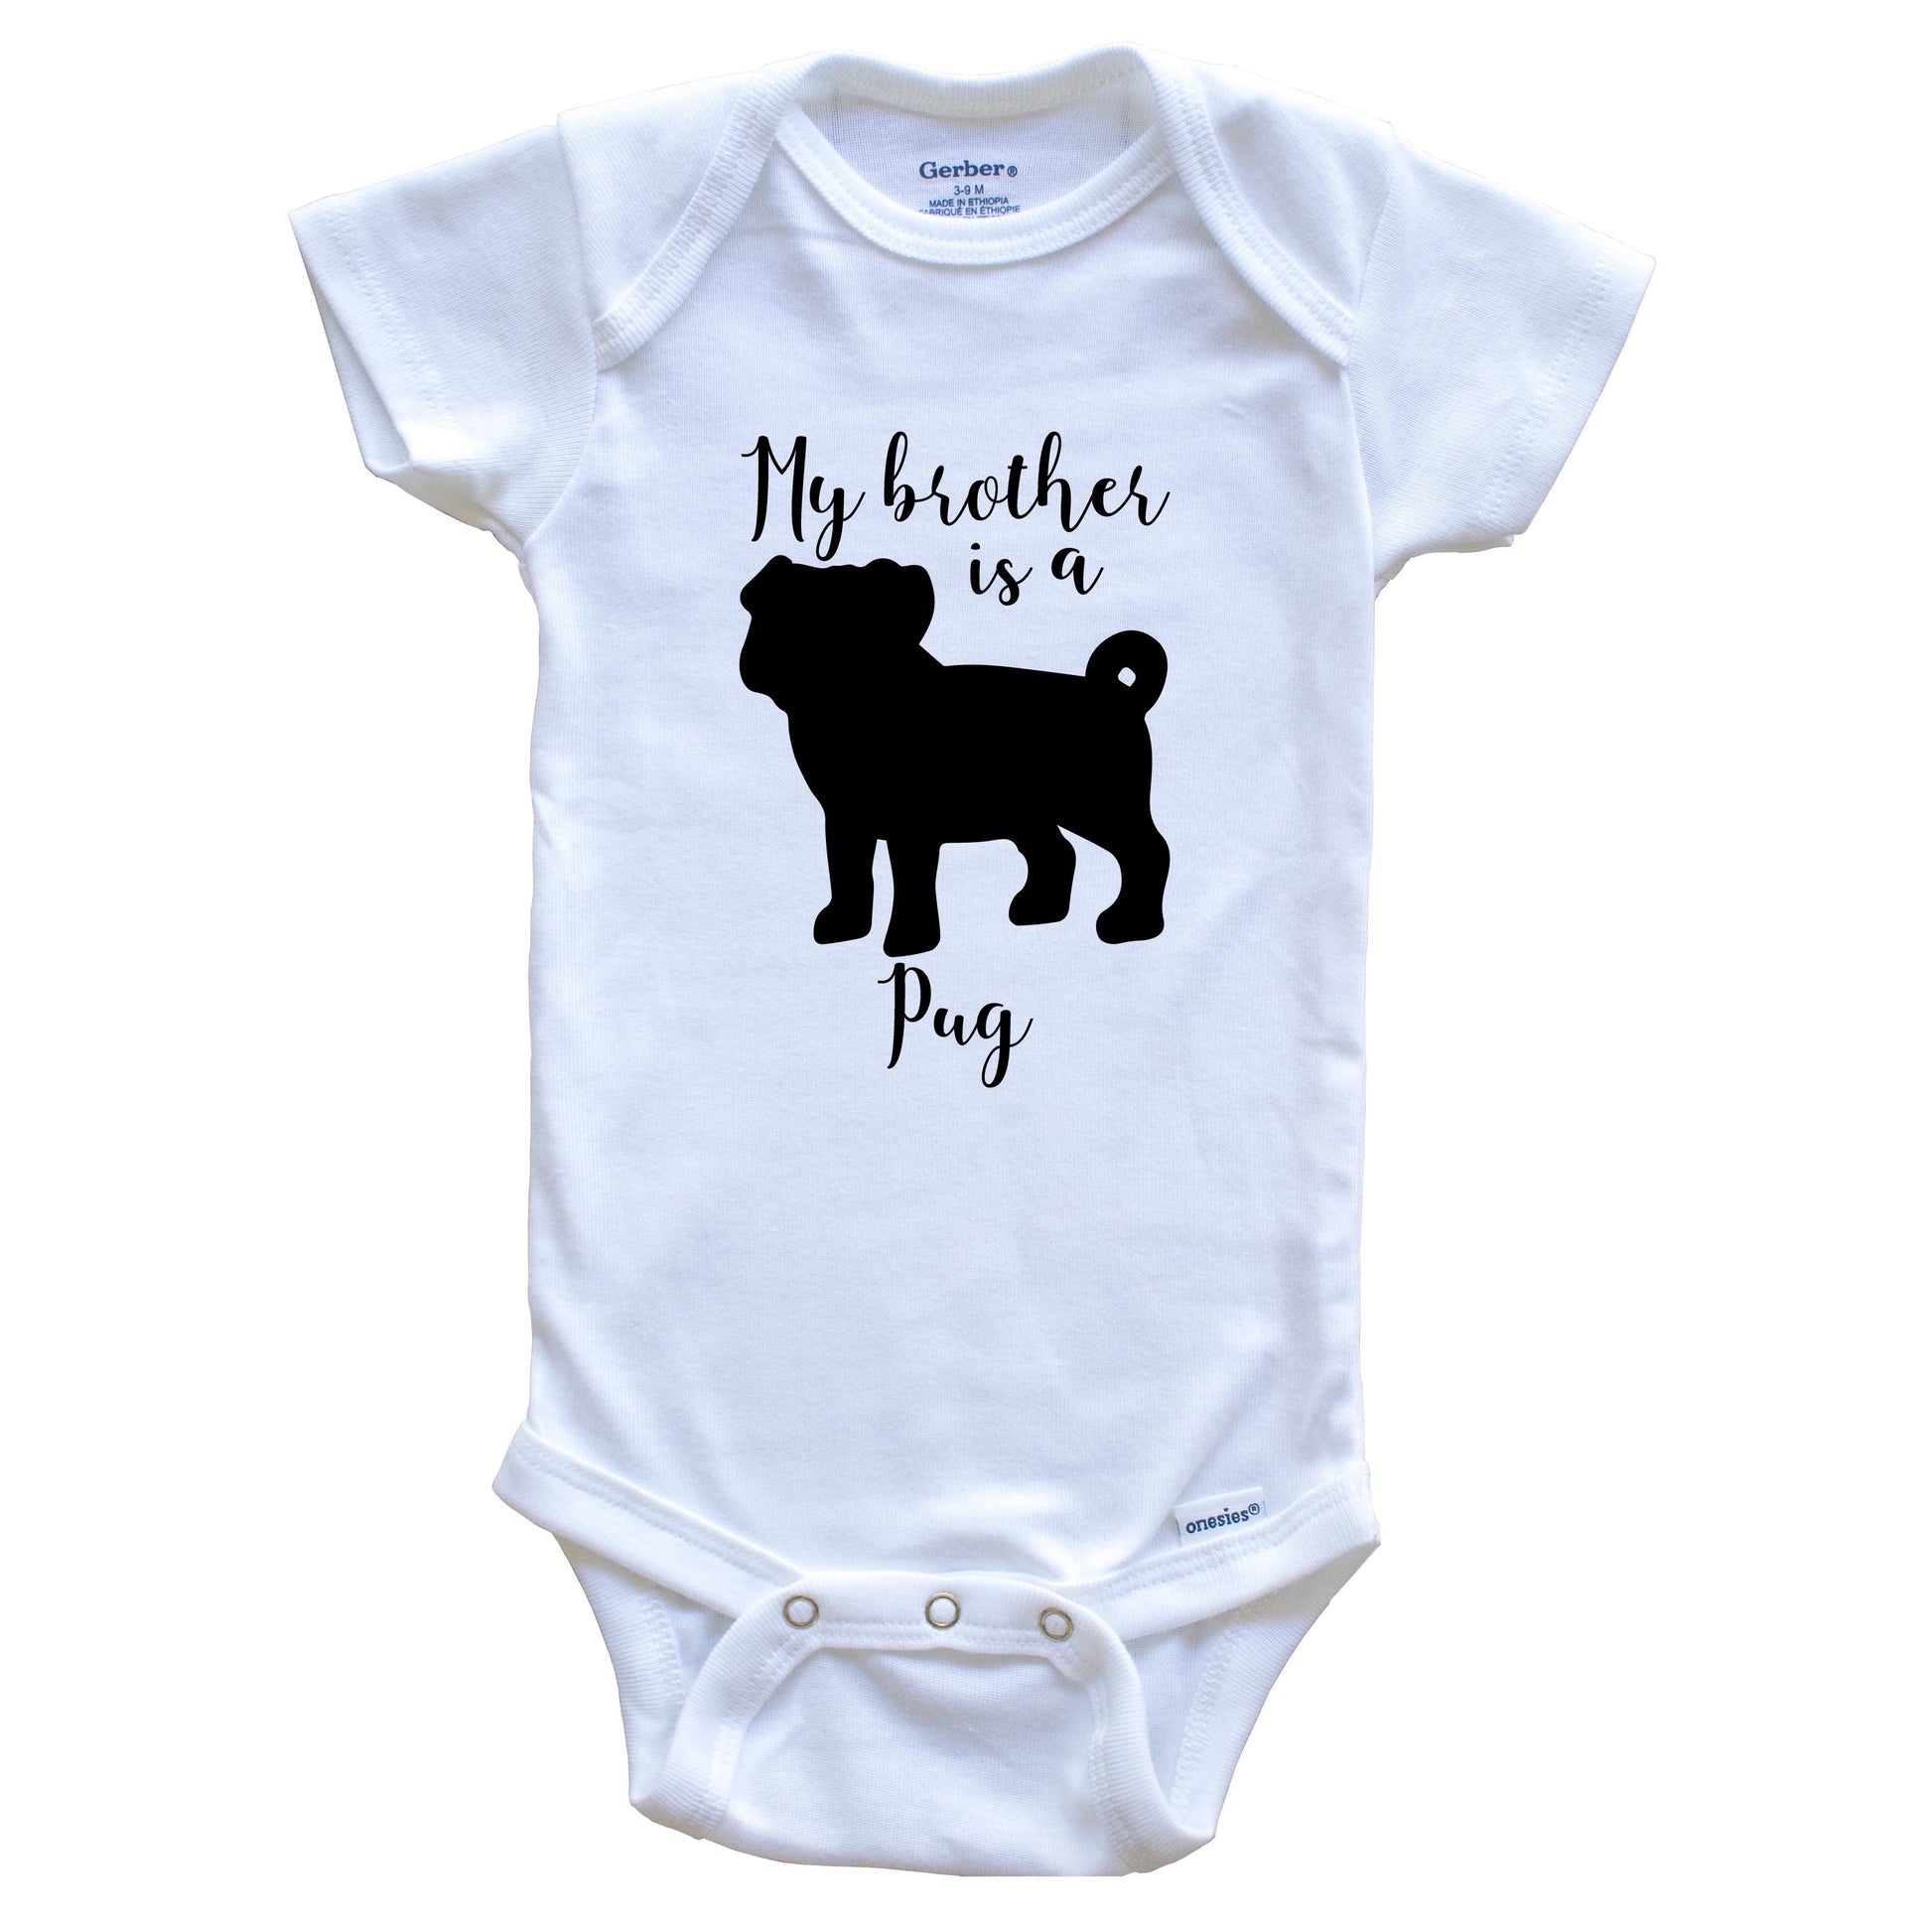 My Brother Is A Pug Cute Dog Baby Onesie - Pug One Piece Baby Bodysuit